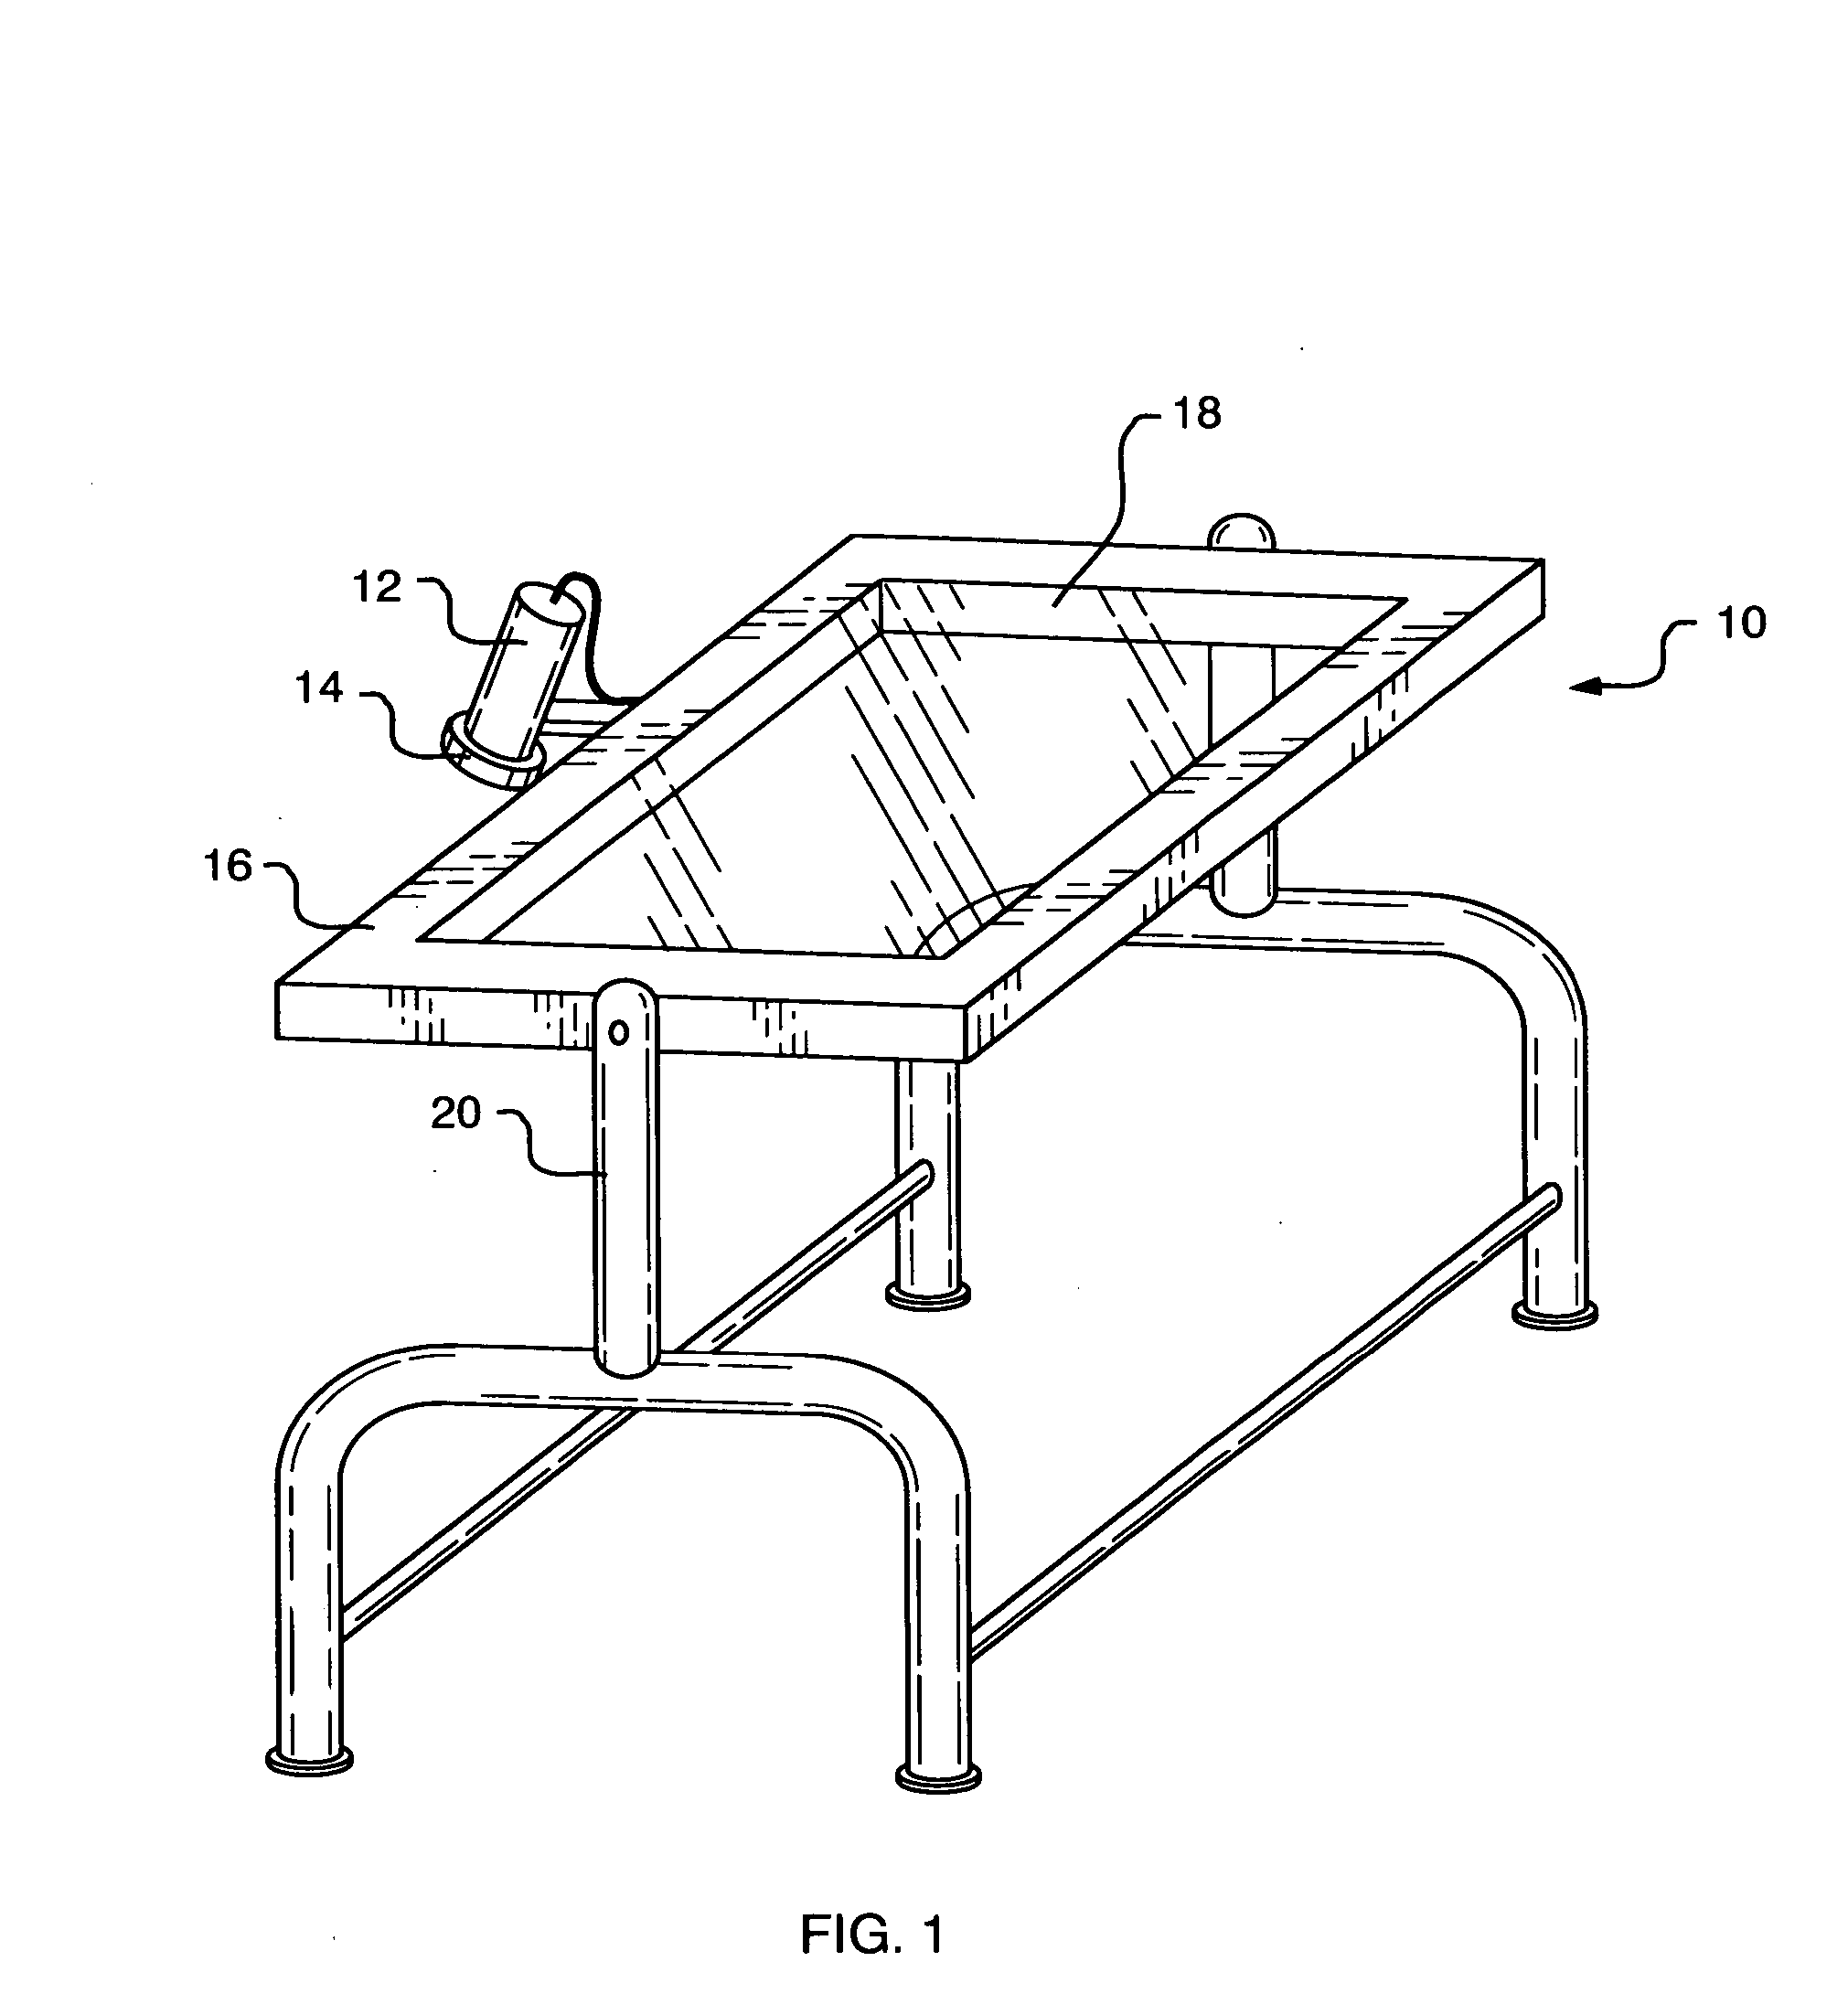 Polarized material inspection apparatus and system